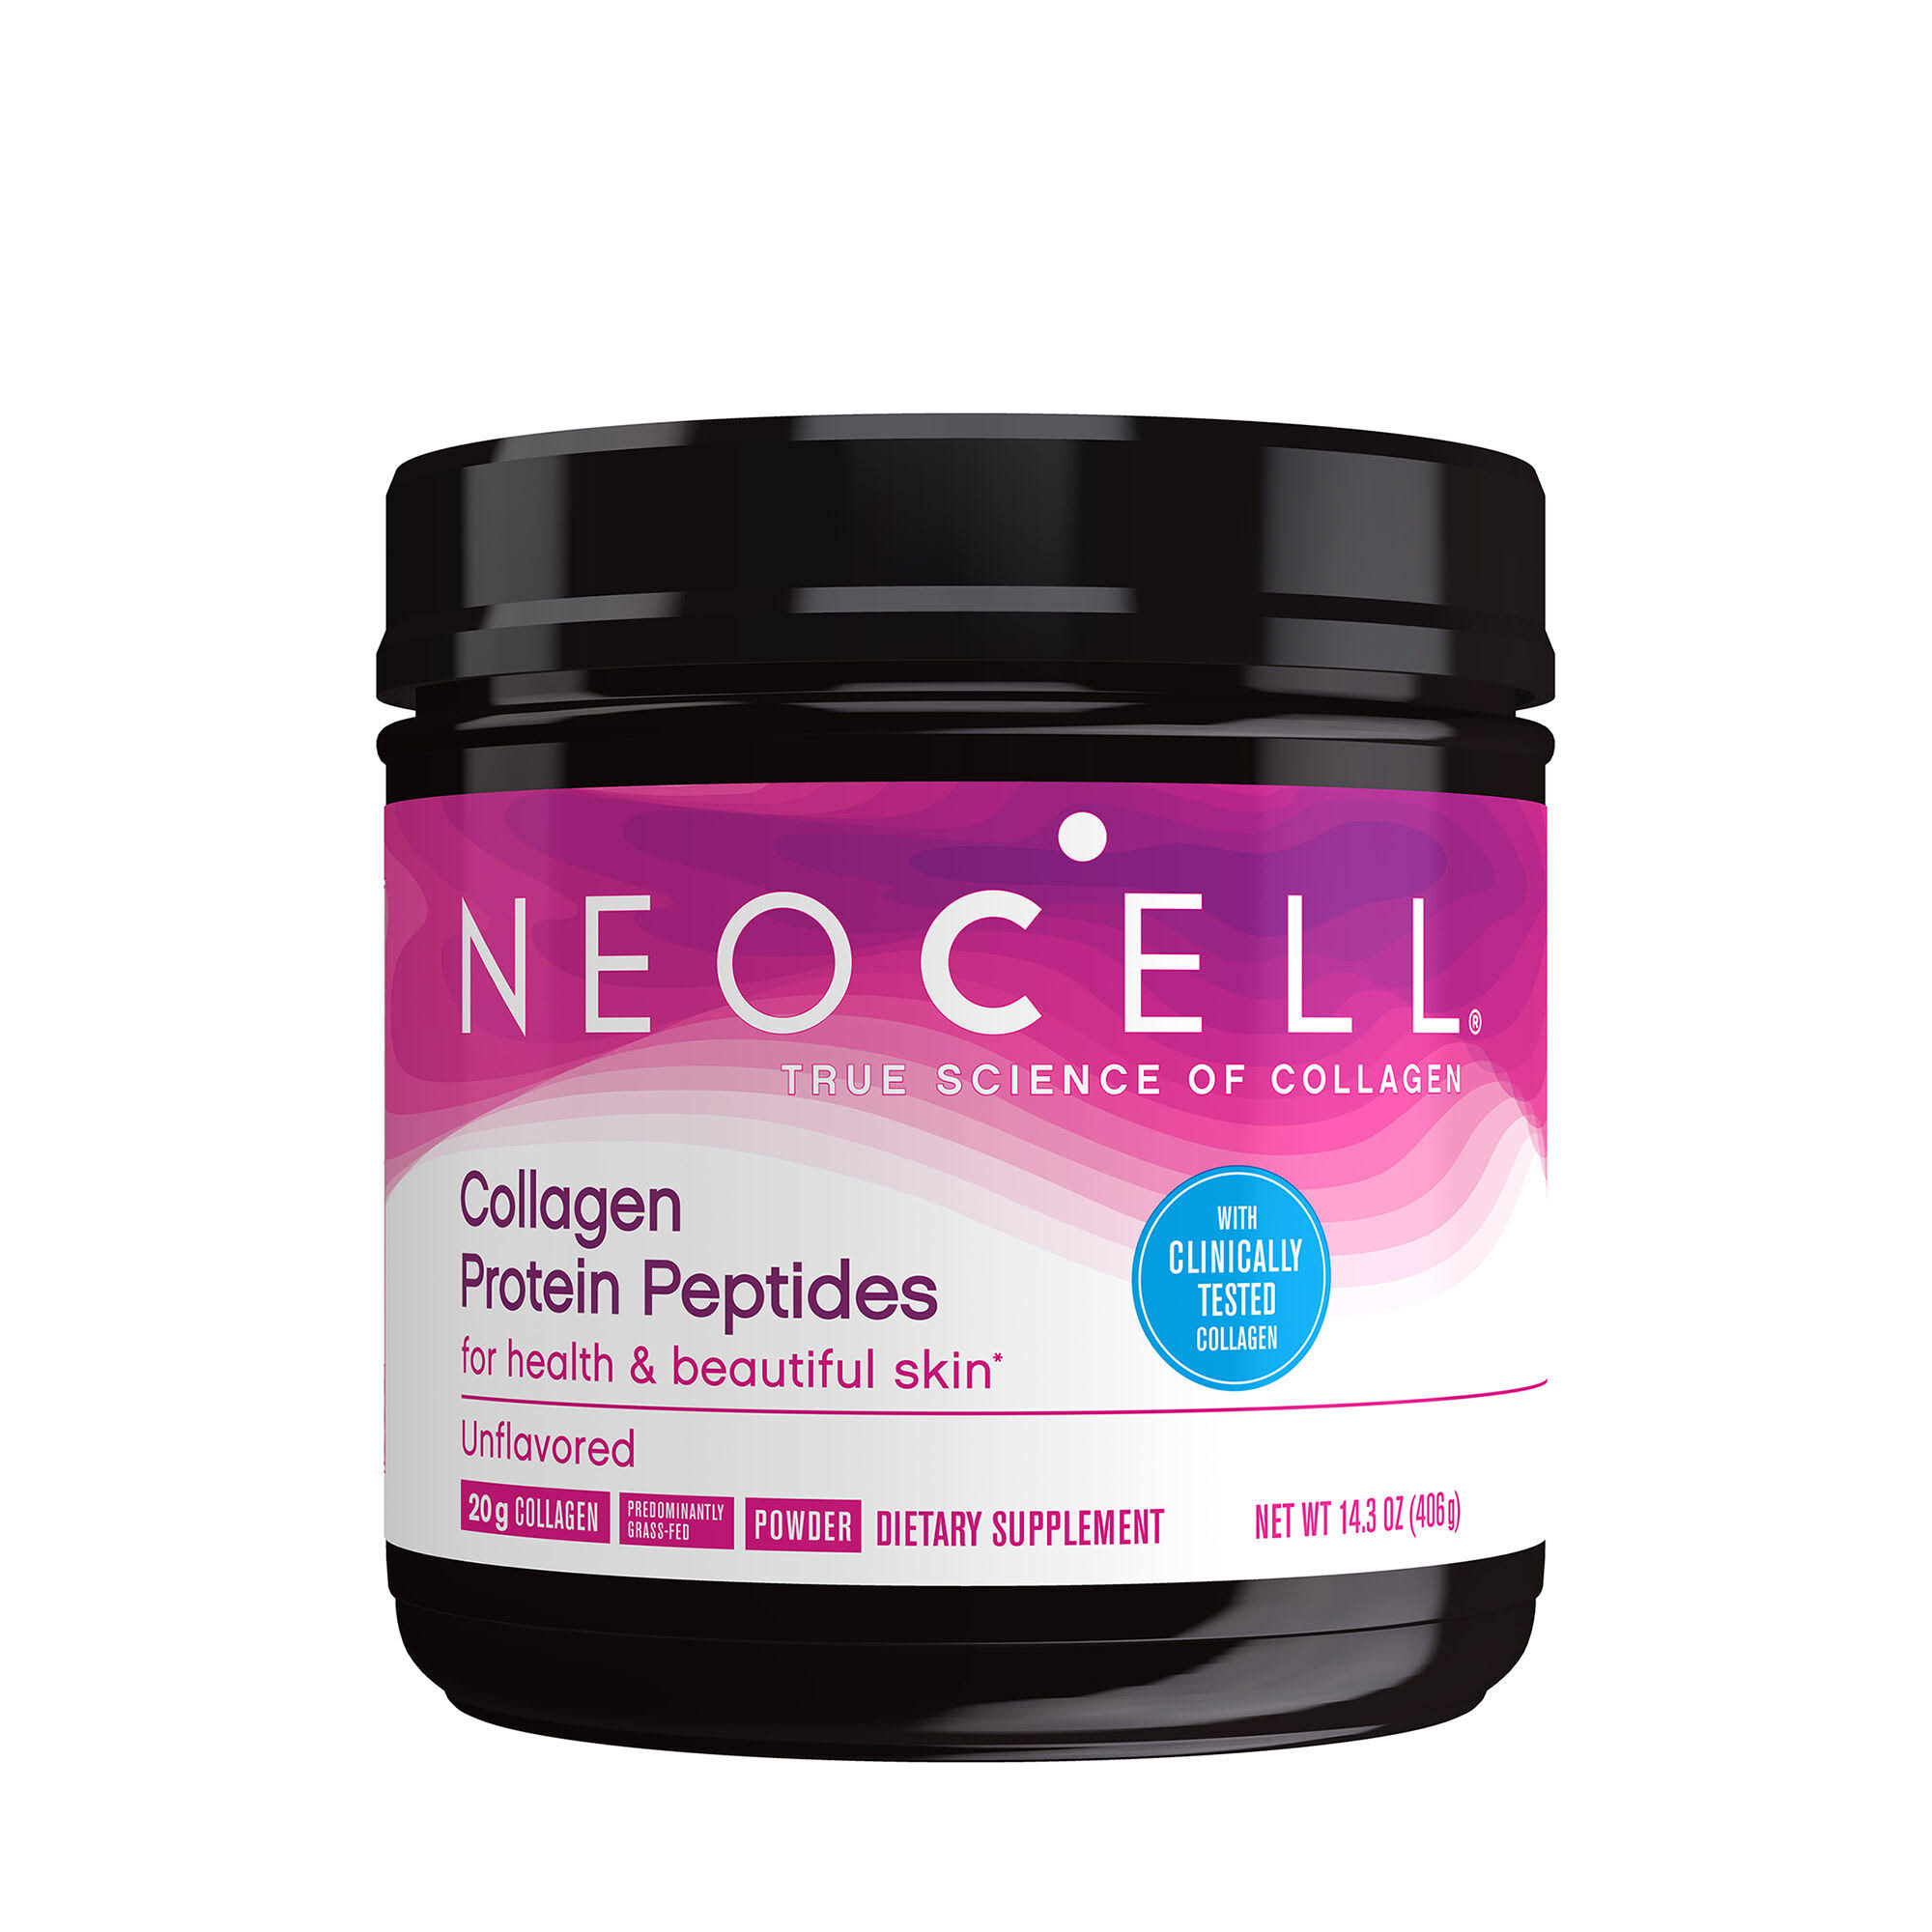 Neocell Collagen Protein Peptides - 14.3 oz (Unflavored)